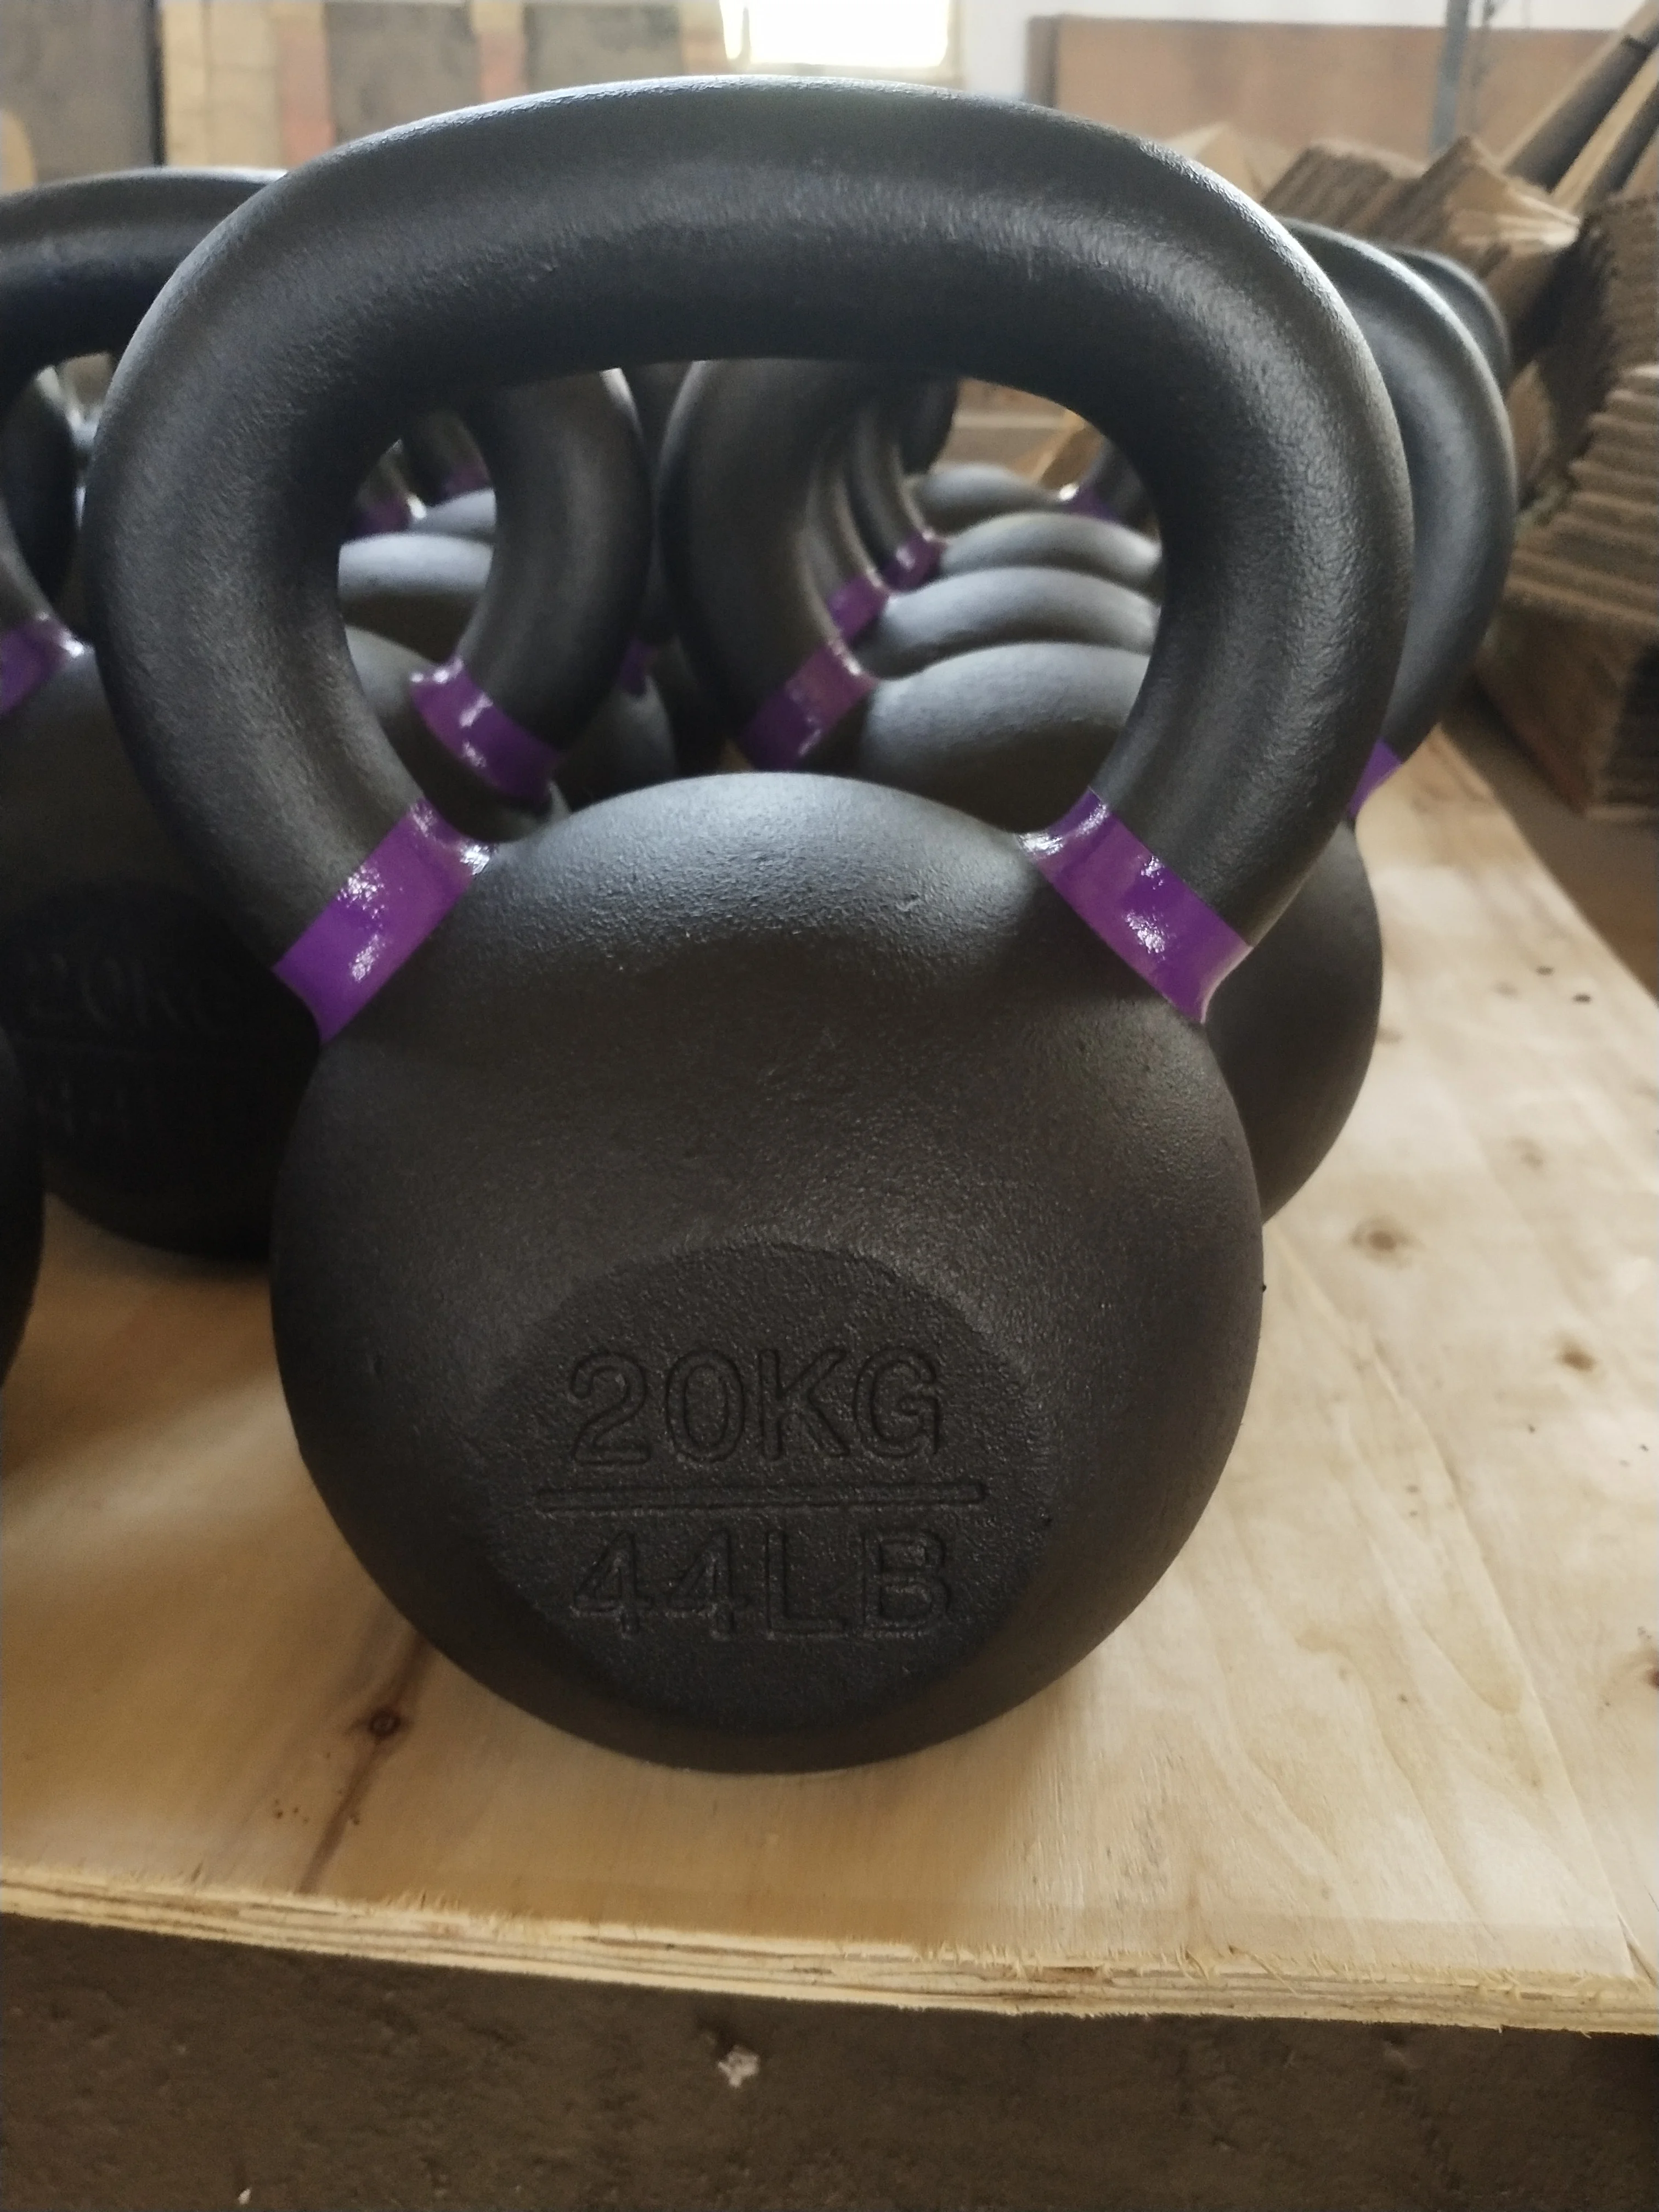 Pro Cast Iron Competition Kettlebell With Colored Stripes Powder Coated